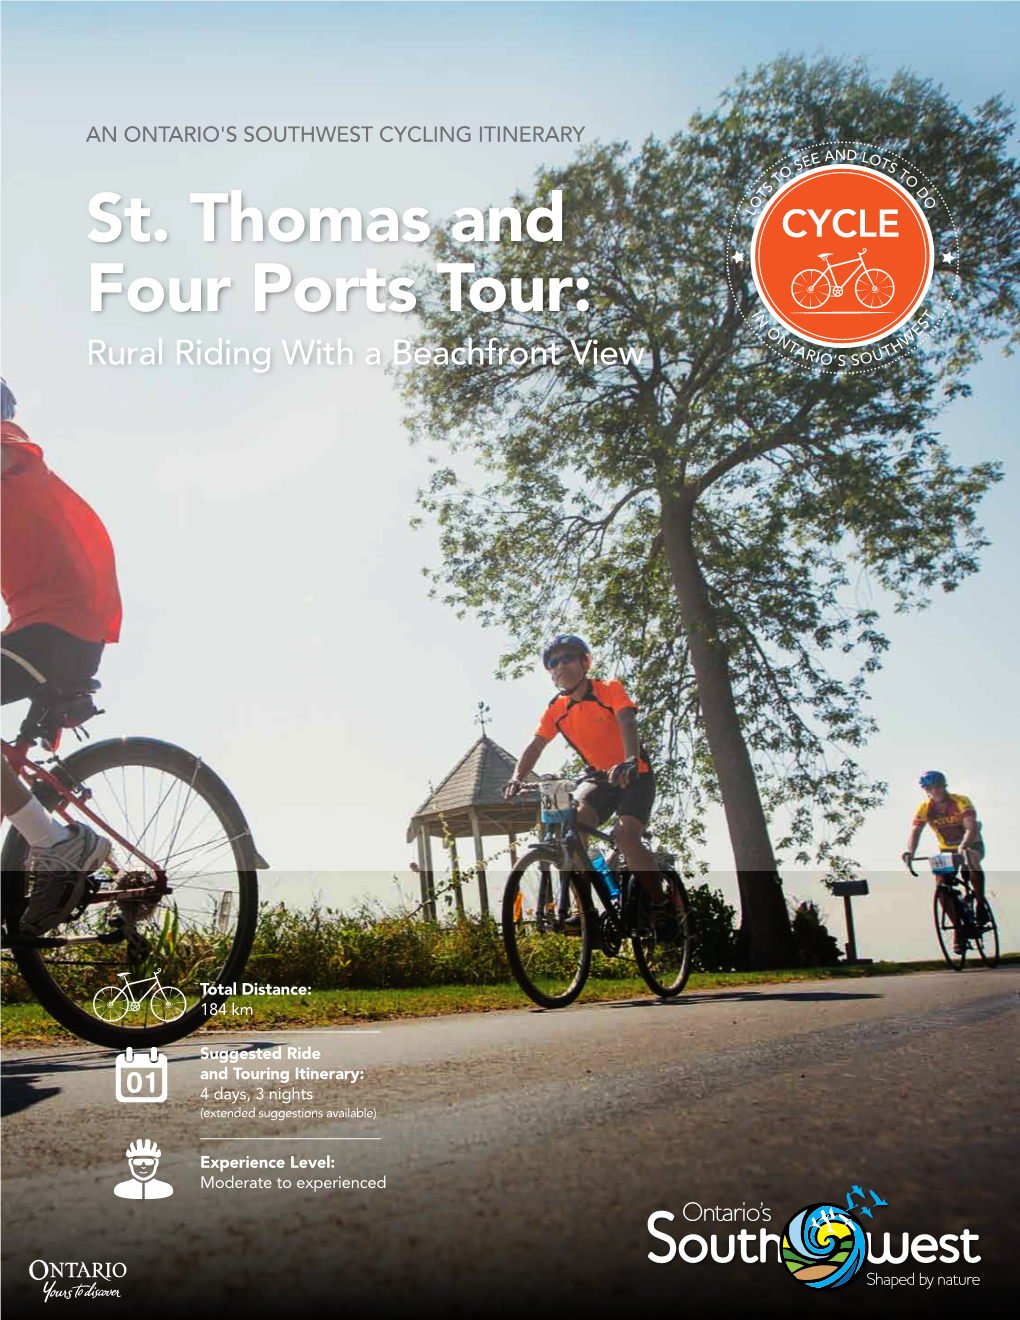 St. Thomas and Four Ports Tour: Rural Riding with a Beachfront View